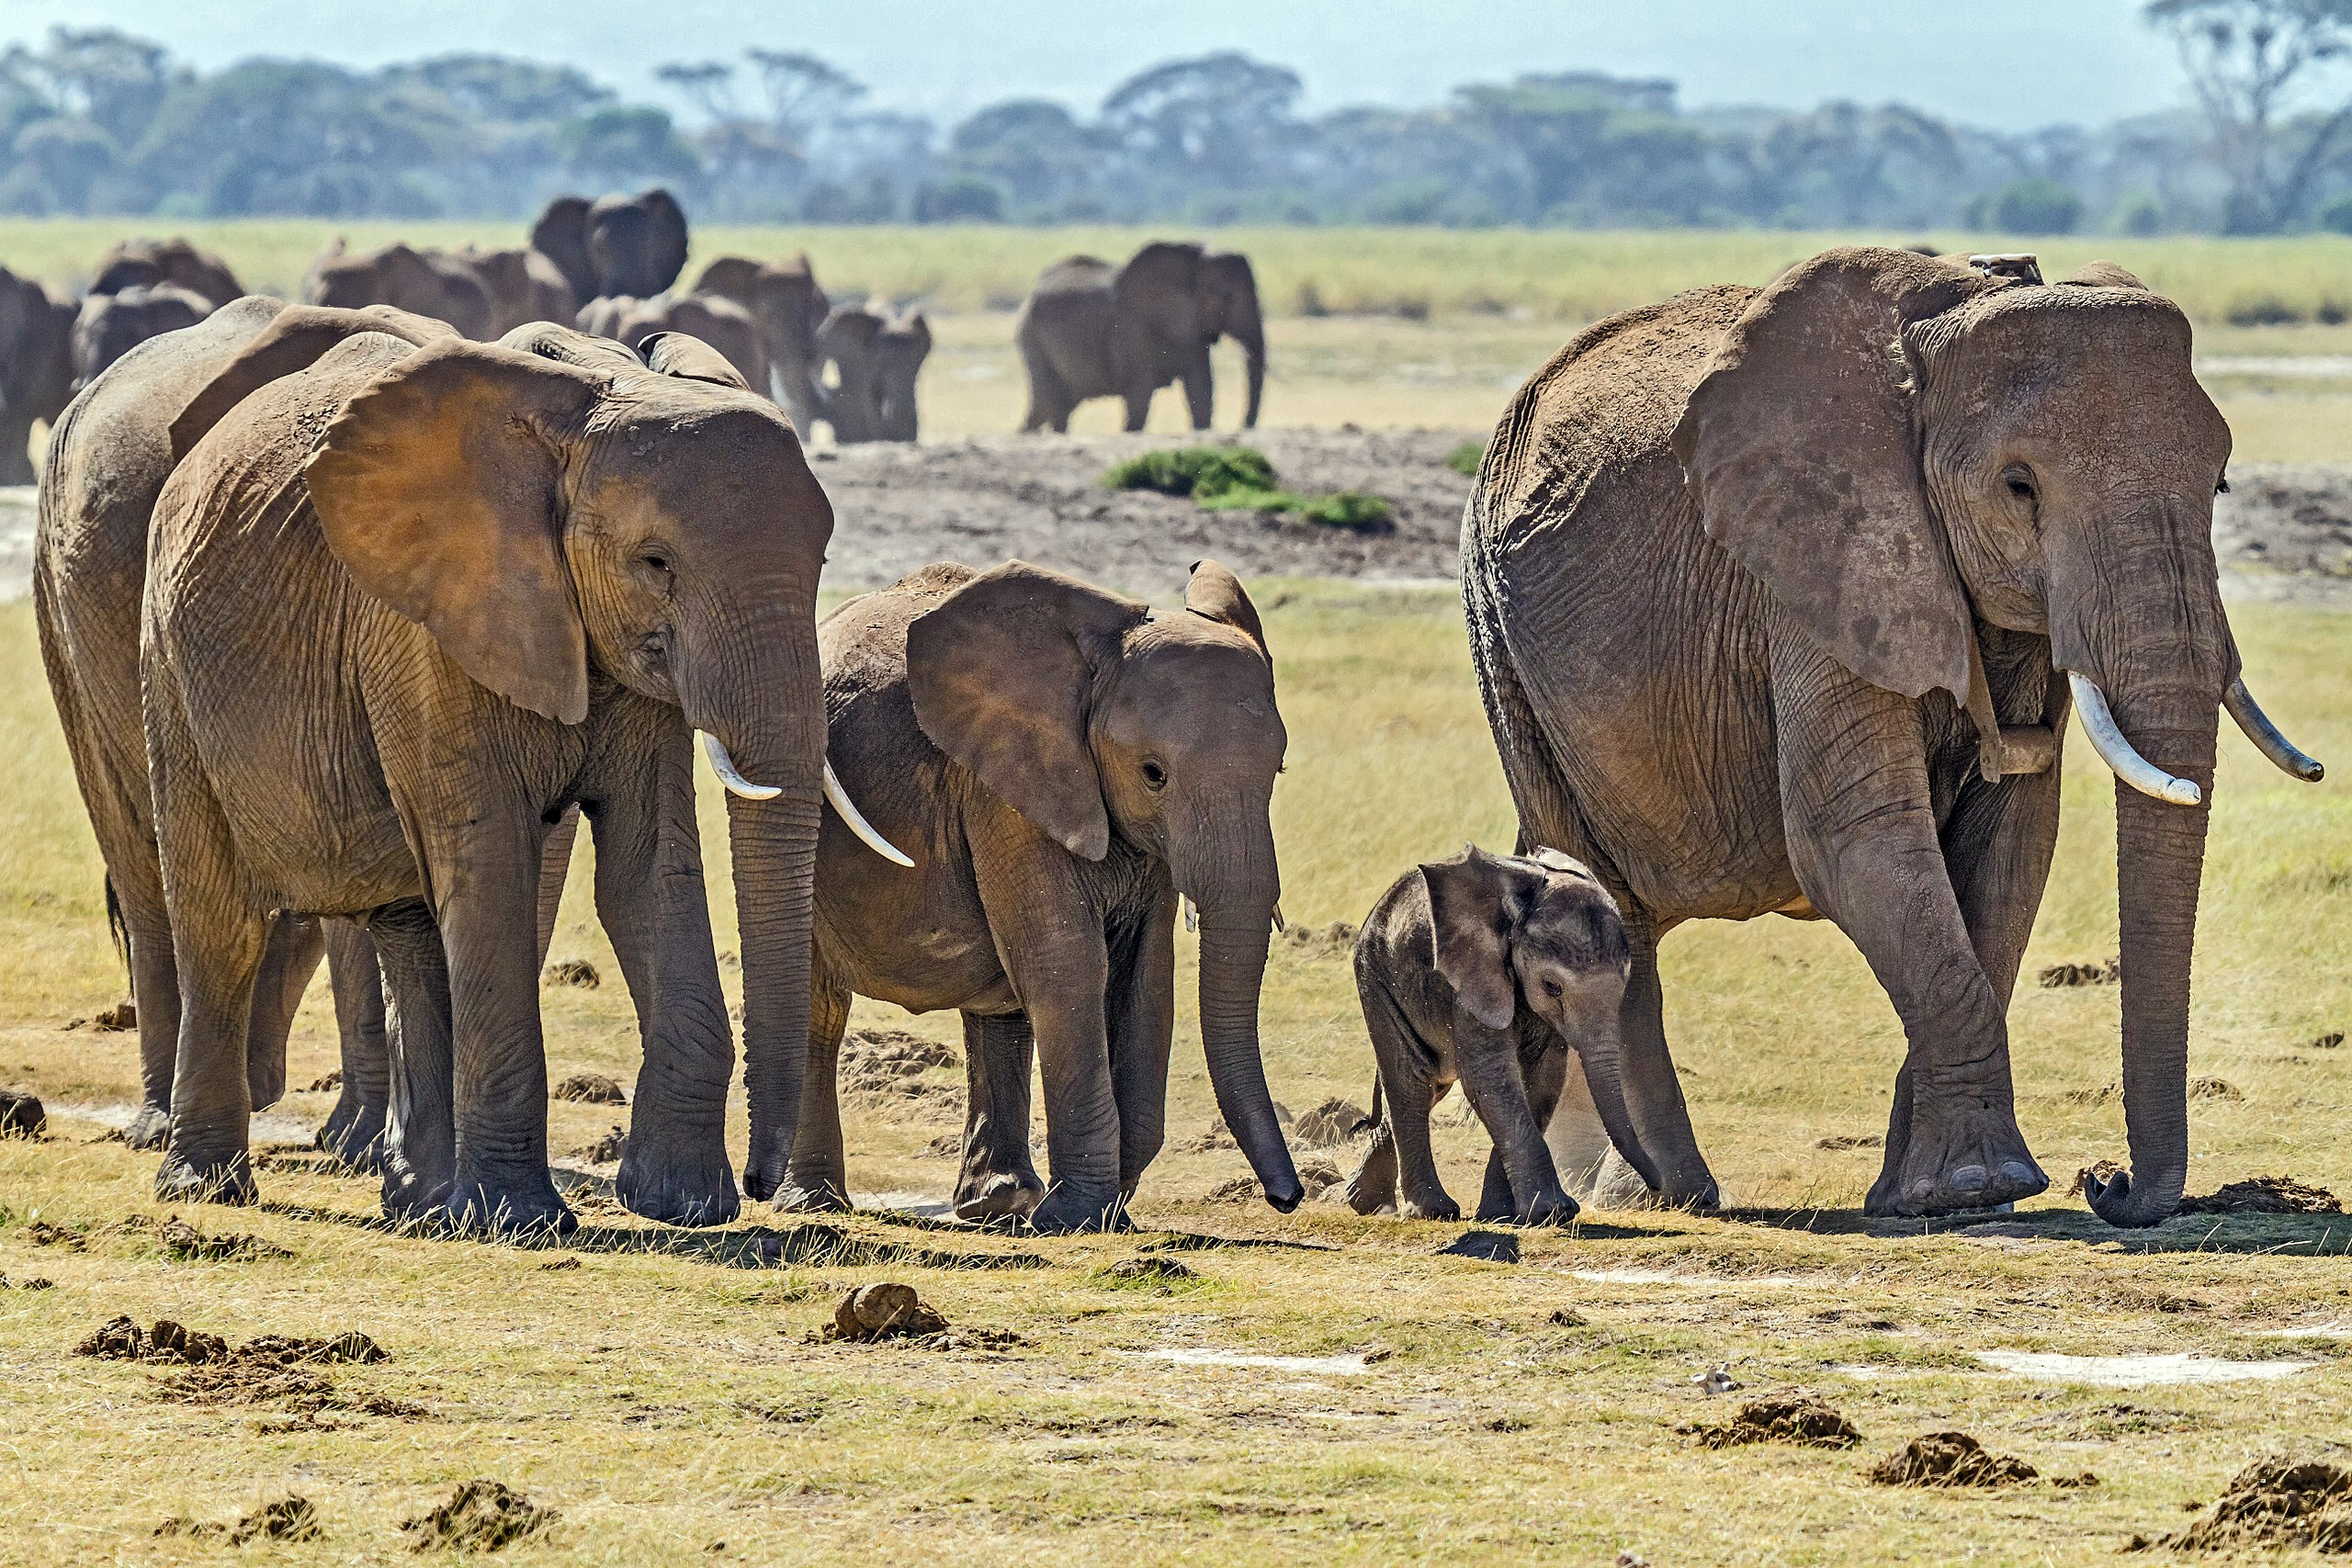 How many elephants are in a herd of elephants?